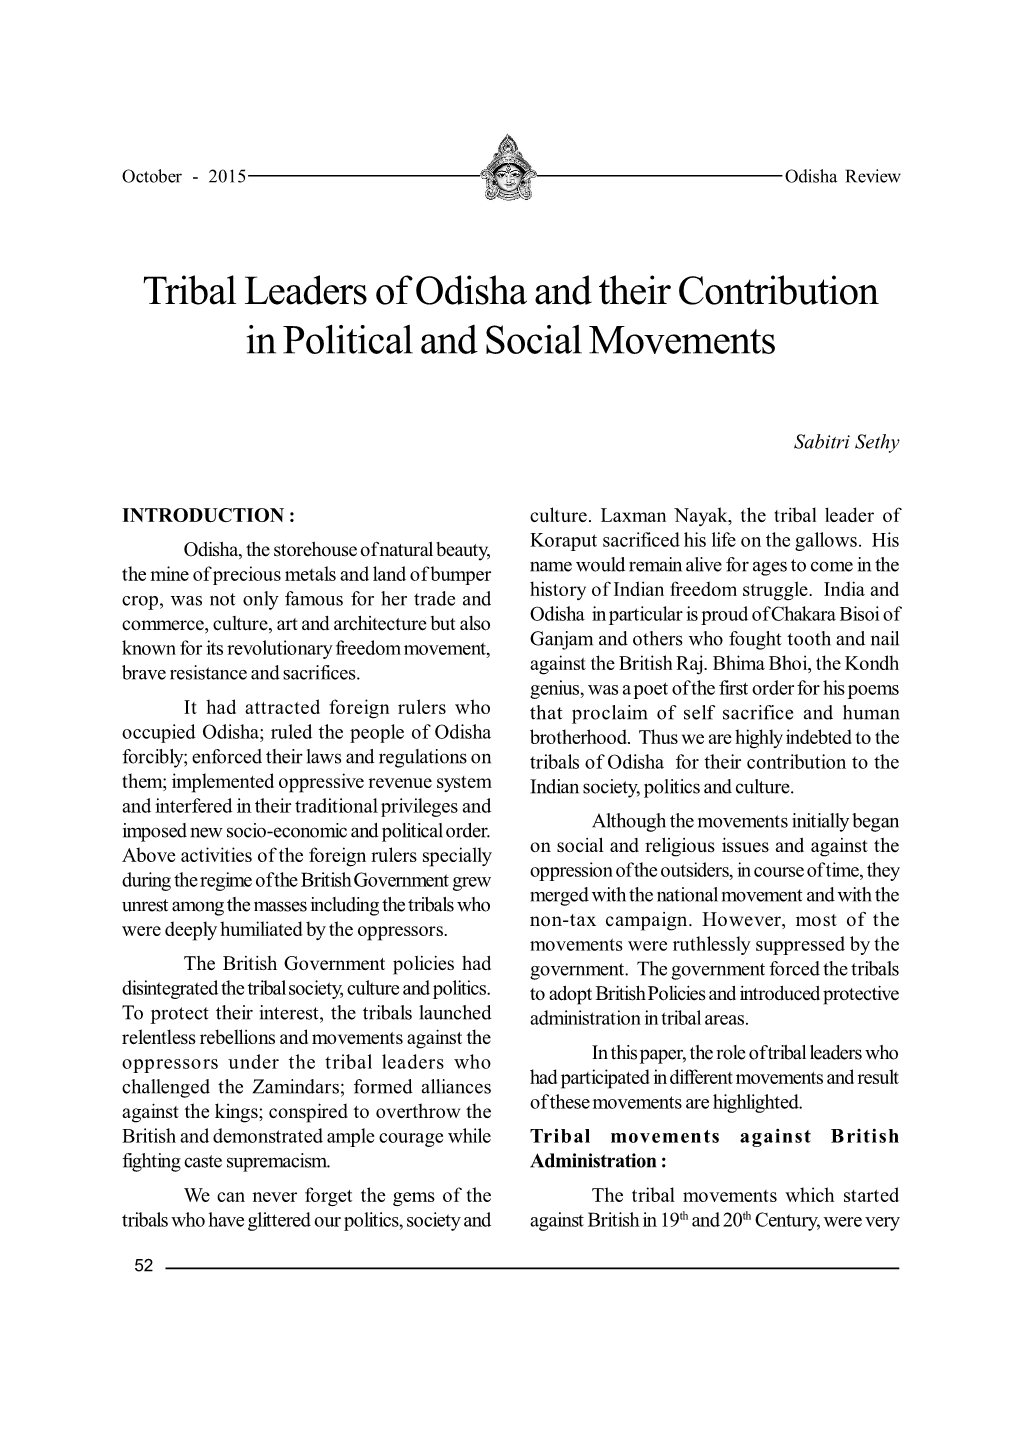 Tribal Leaders of Odisha and Their Contribution in Political and Social Movements